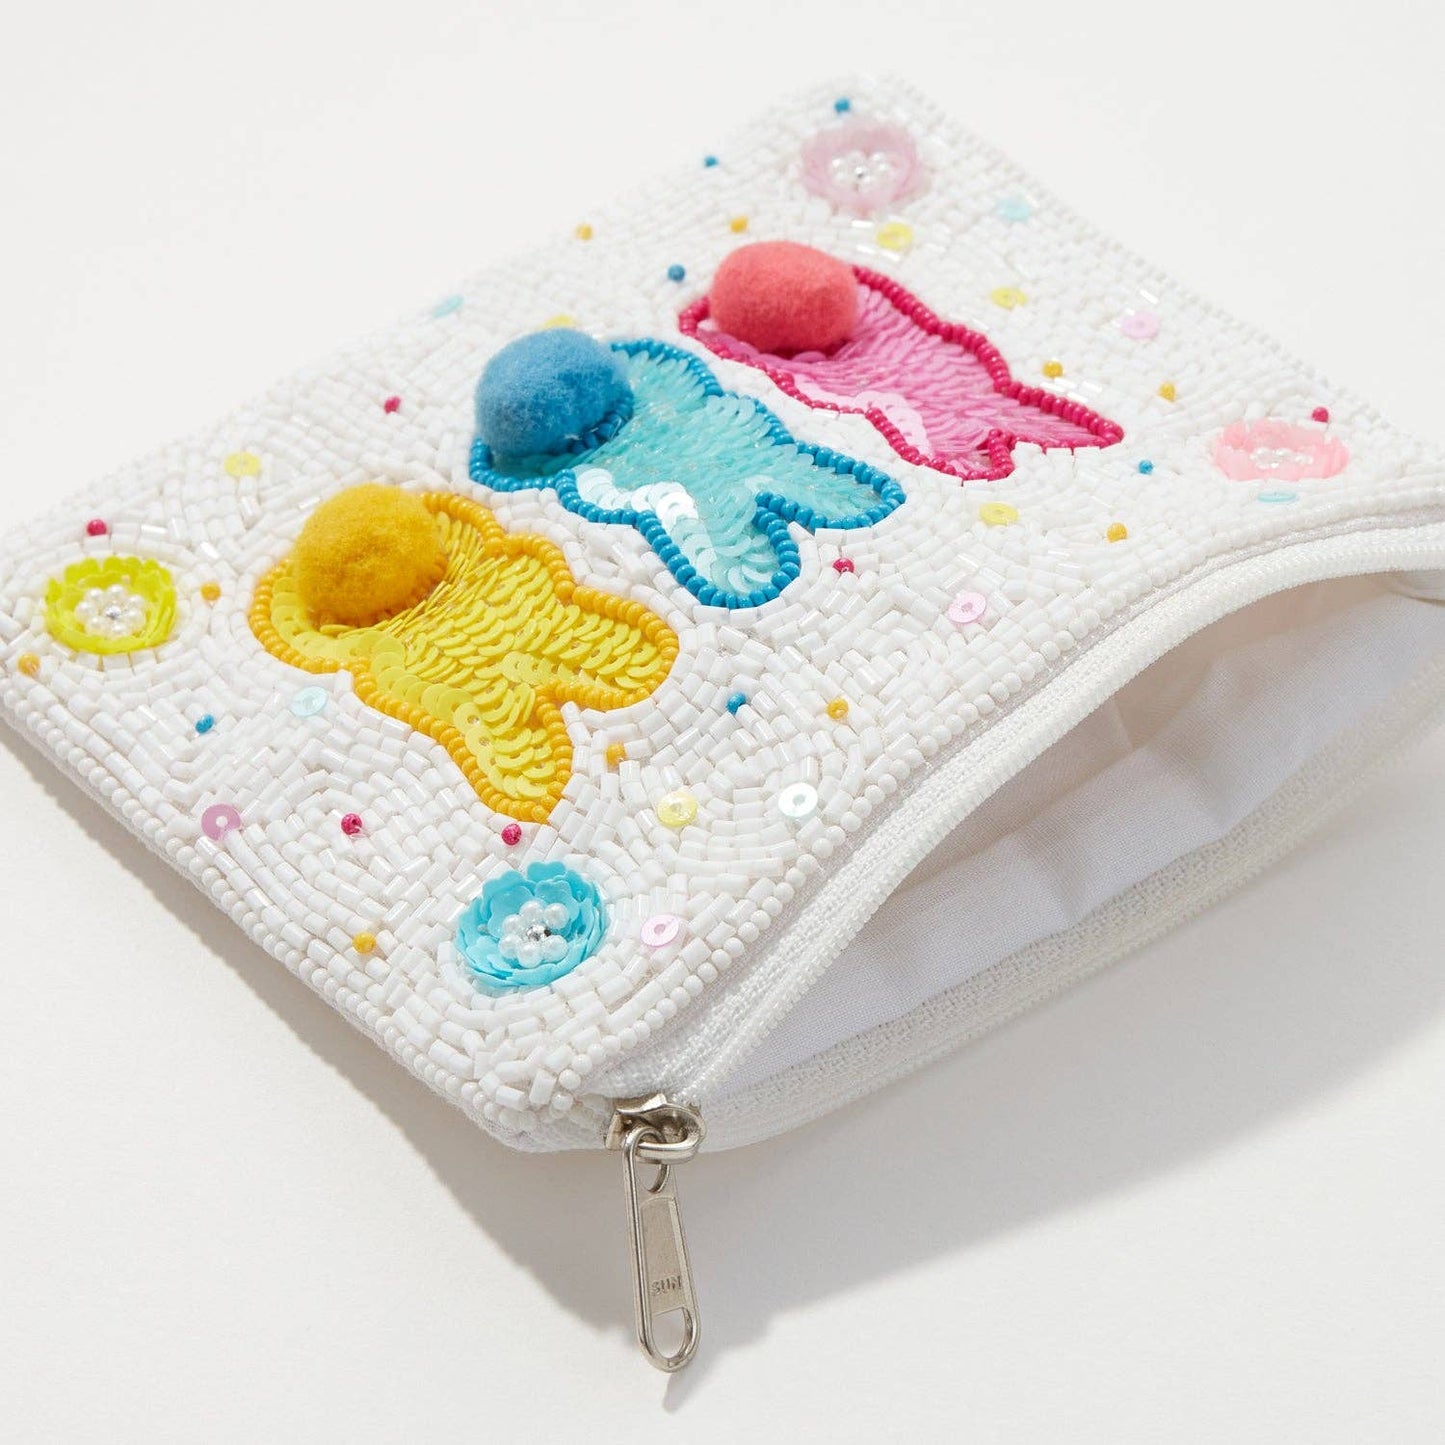 Pom Poms Bunny Tail Beaded Coin Pouch